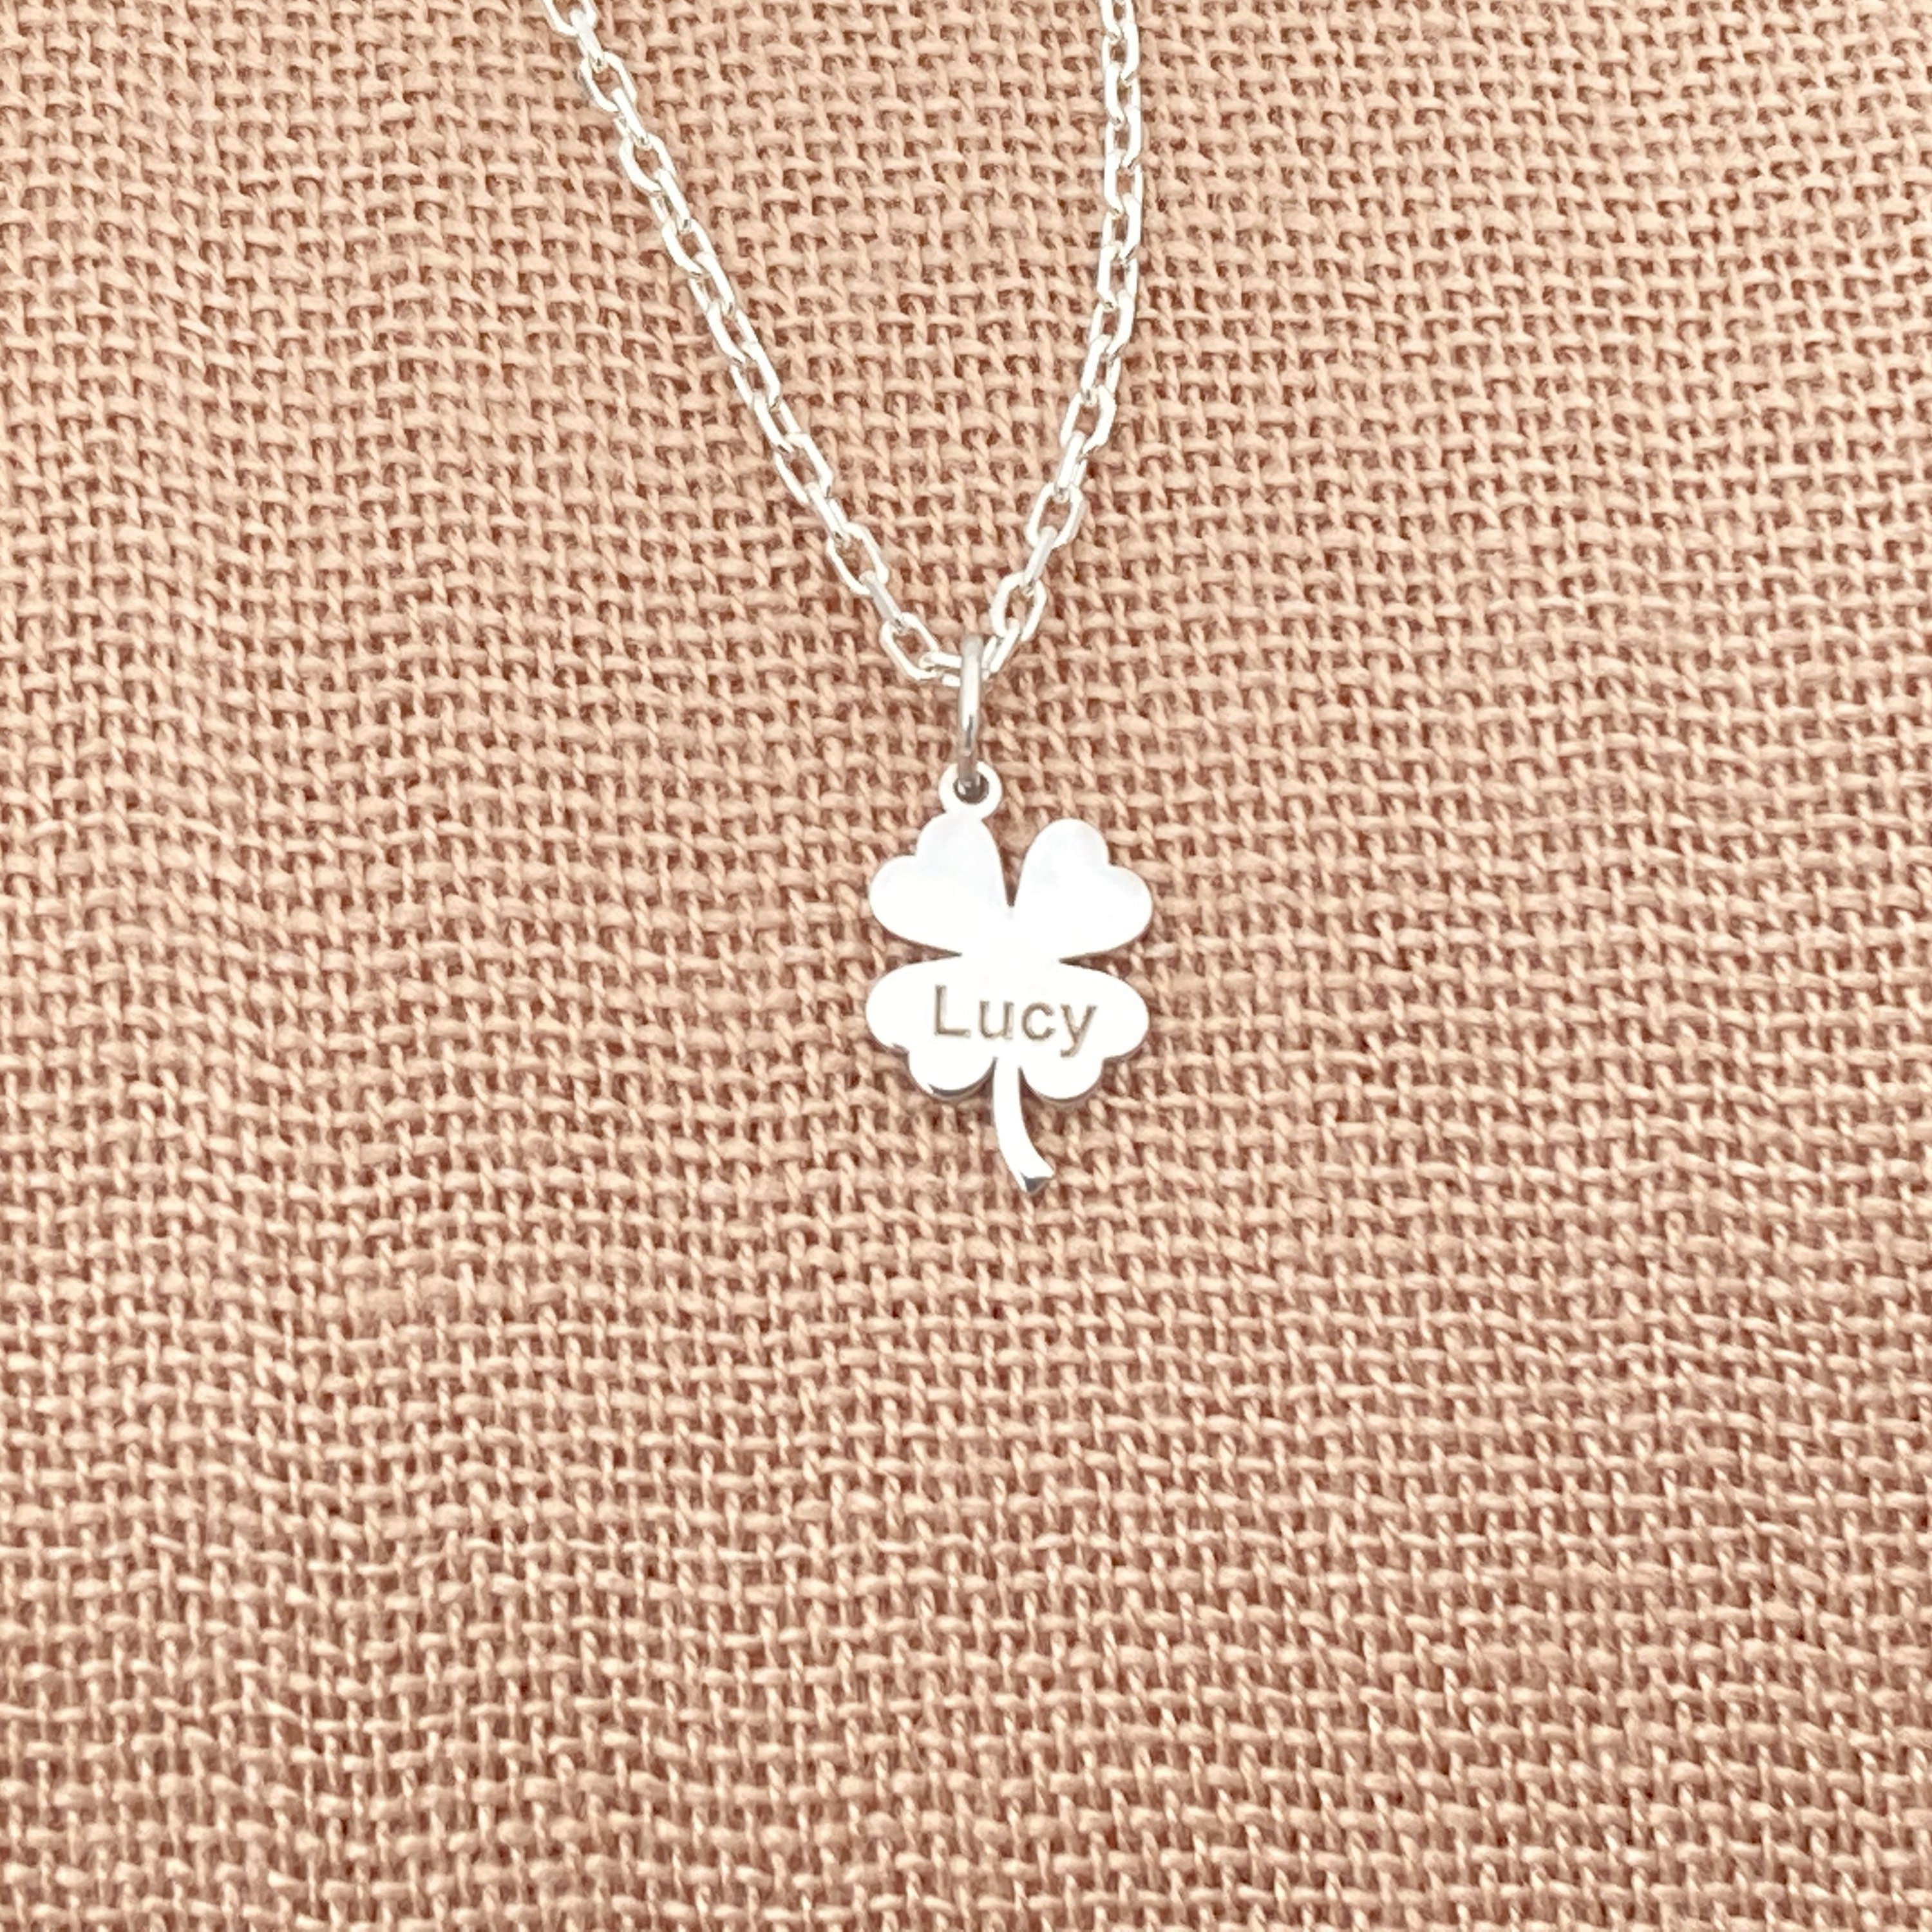  Tewiky Four Leaf Clover Necklace, 14k Gold Plated CZ Heart  Necklace Dainty Magnetic Necklace Simple Lucky Clover Necklace Delicate  Personalized Necklace Birthday for Women Girls: Clothing, Shoes & Jewelry